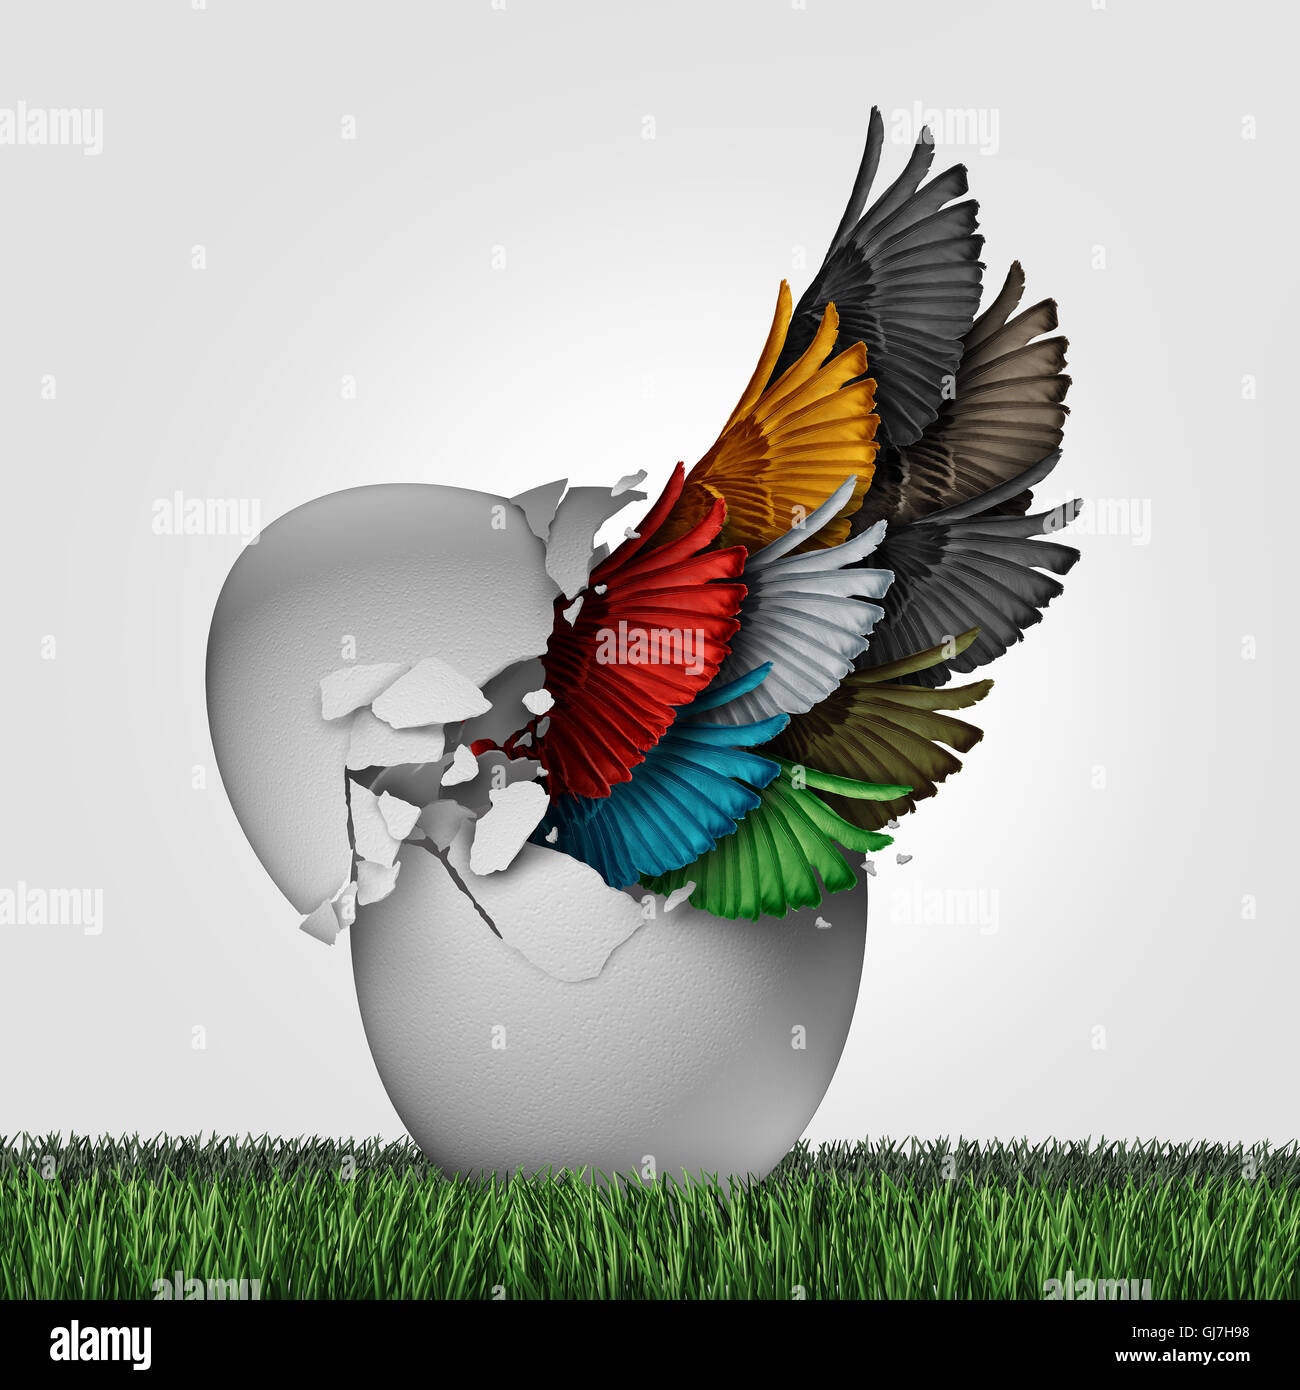 Business organization start as a concept for a new startup corporation or starting a venture with diversity for teamwork success as a group of diverse wings emerging out from an egg with 3D illustration elements. Stock Photo